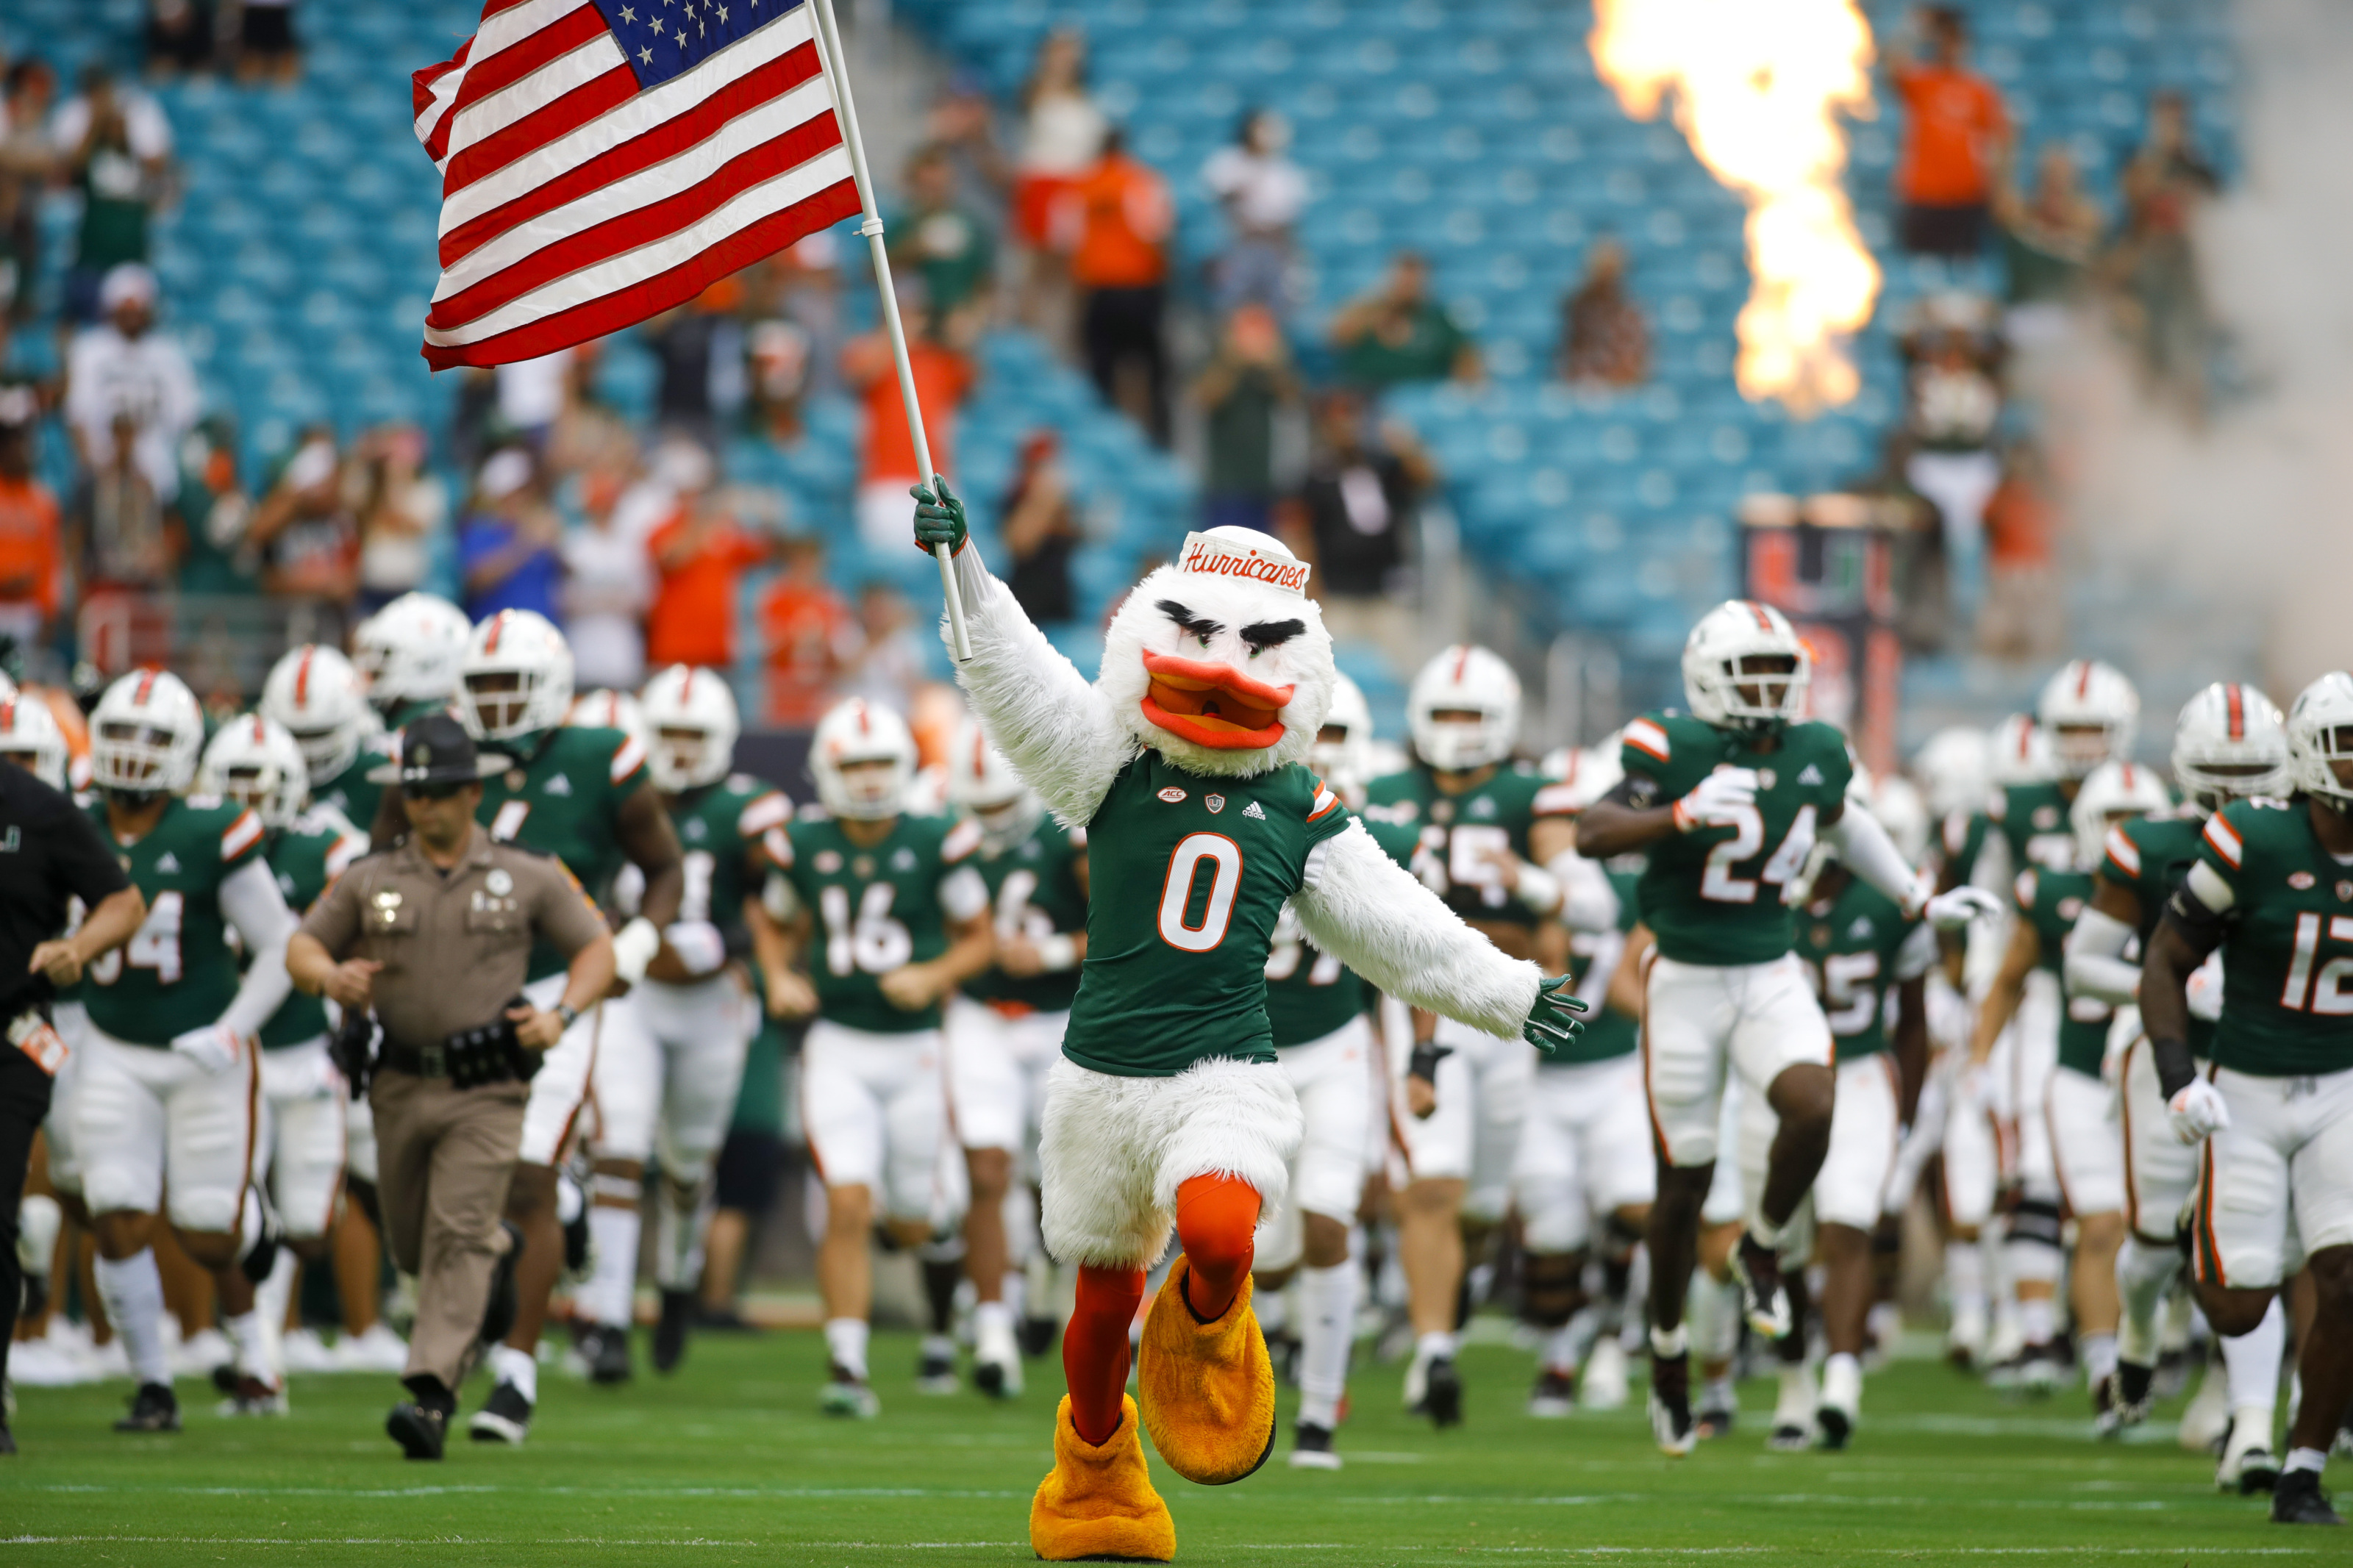 Miami Hurricanes Yohandy Morales and Andrew Walters Selected on